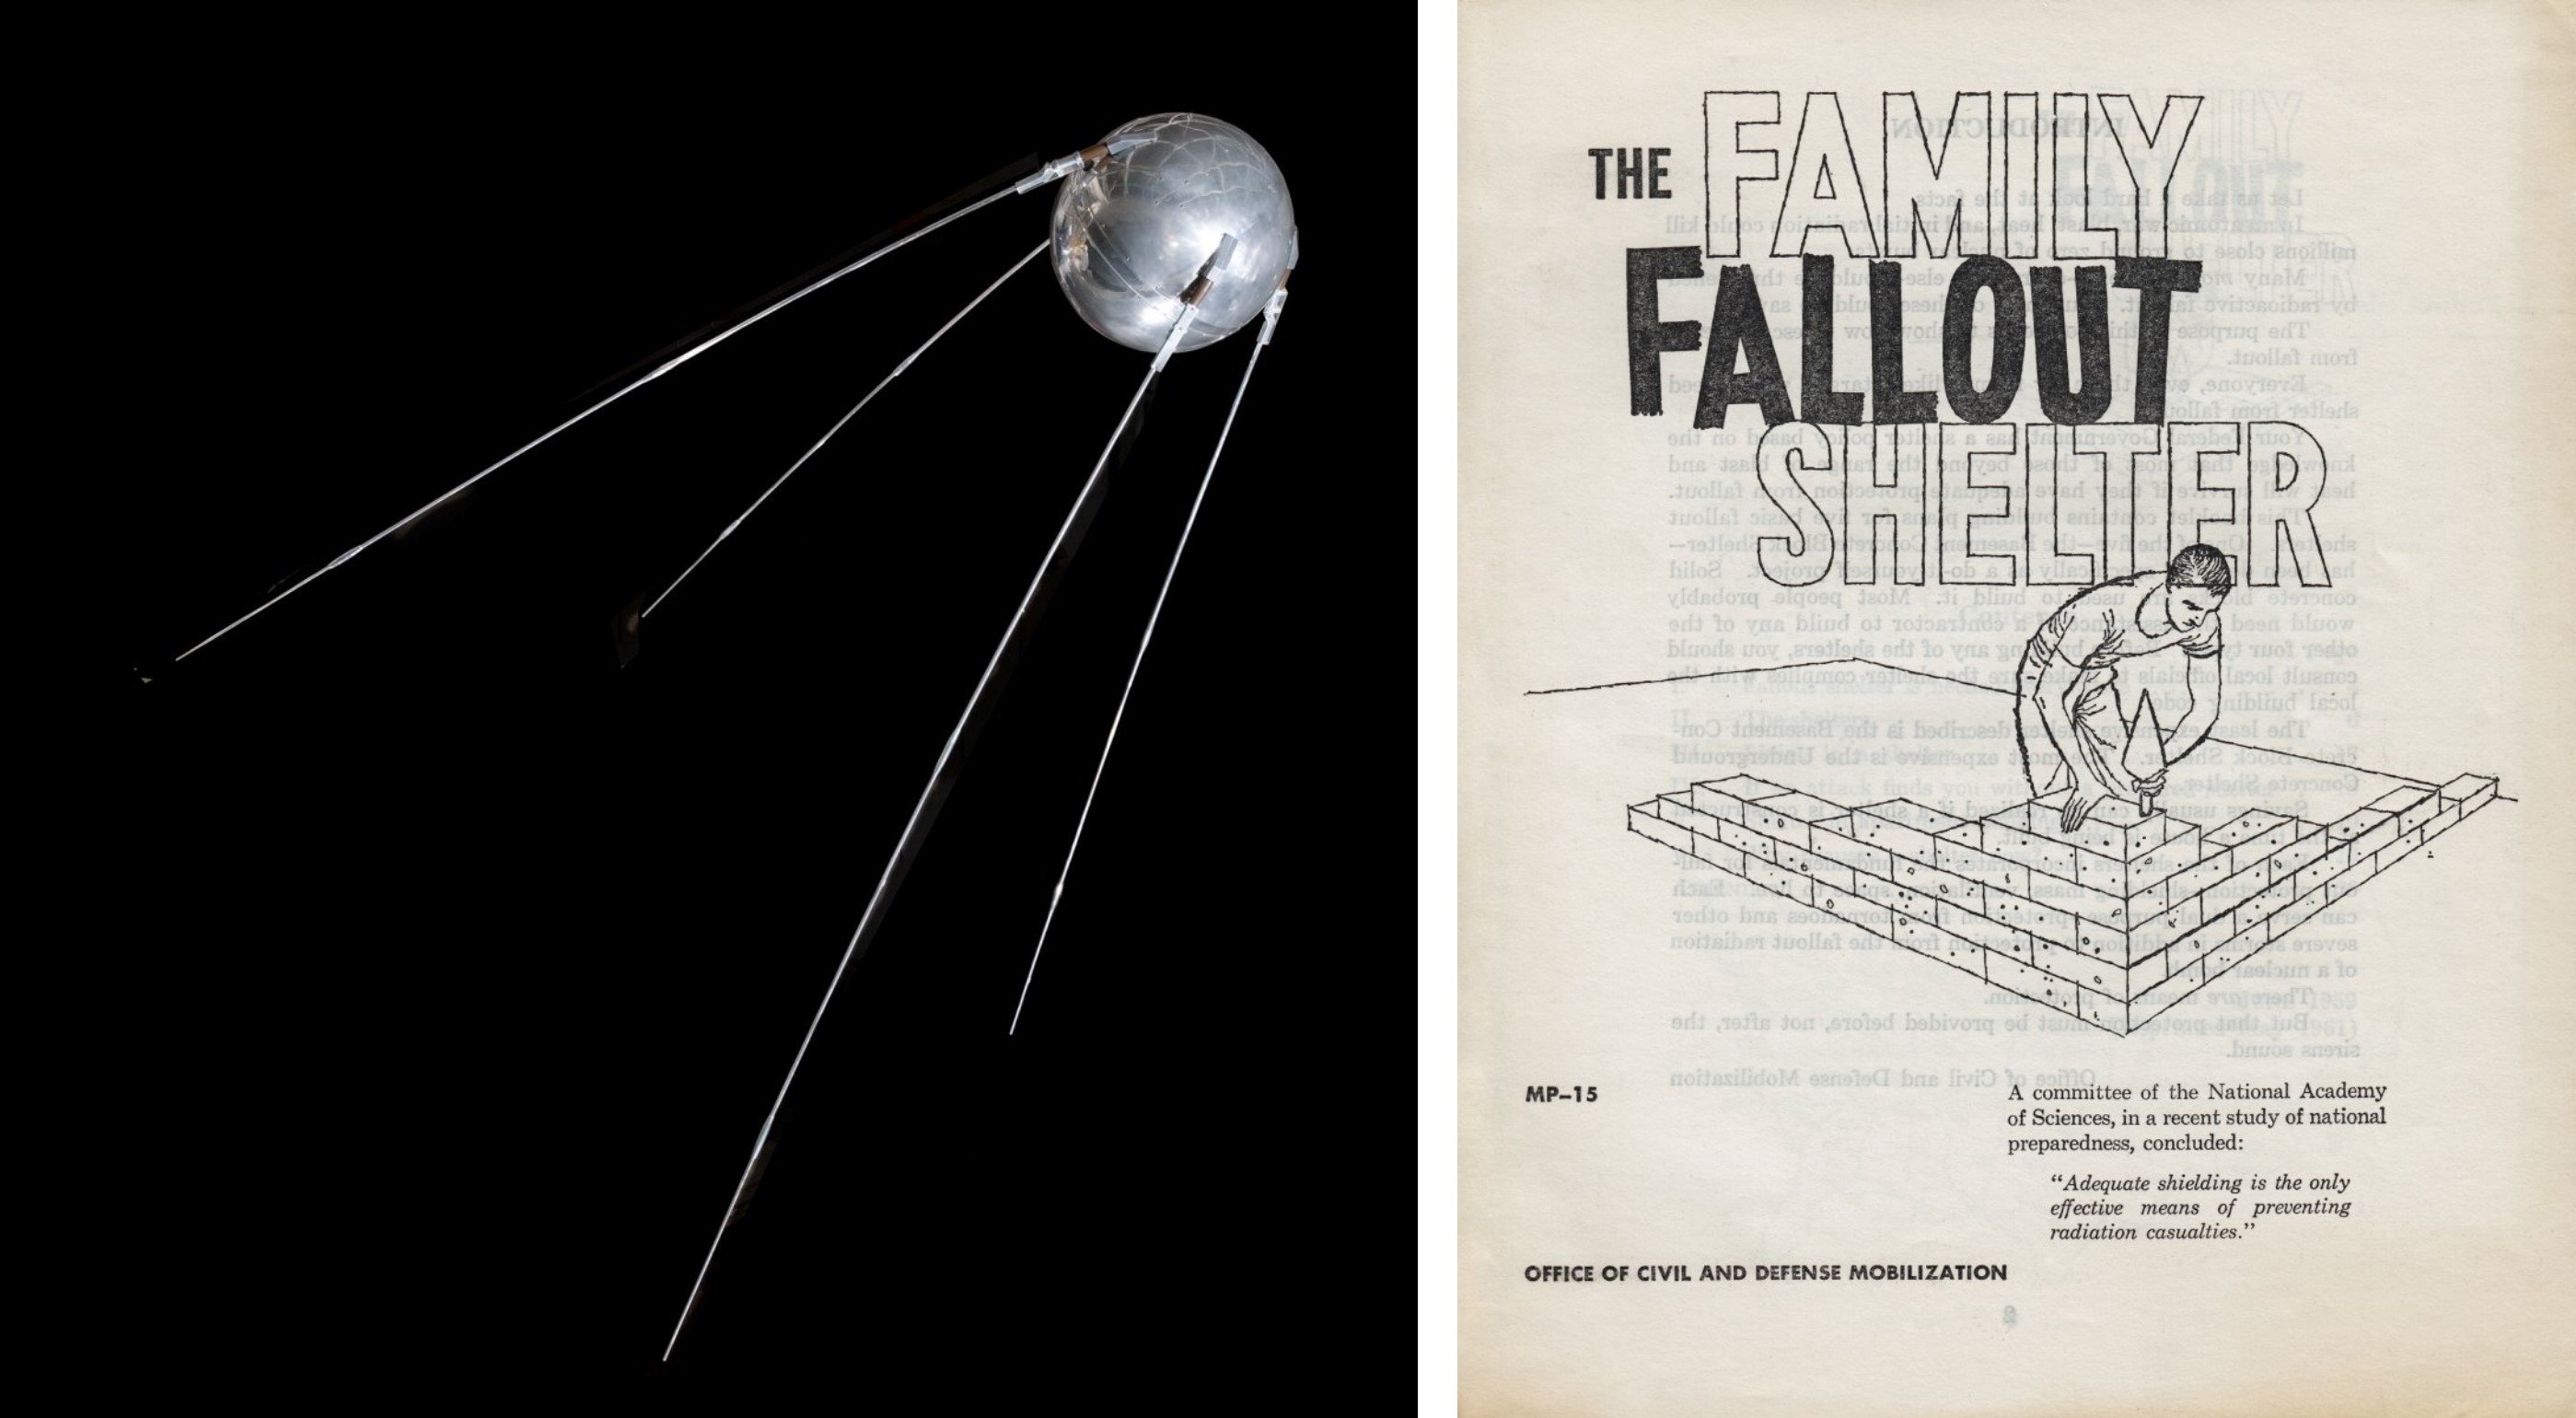 On the left, a replica of Sputnik 1. On the right, the cover of the informational booklet 'The Family Fallout Shelter.'